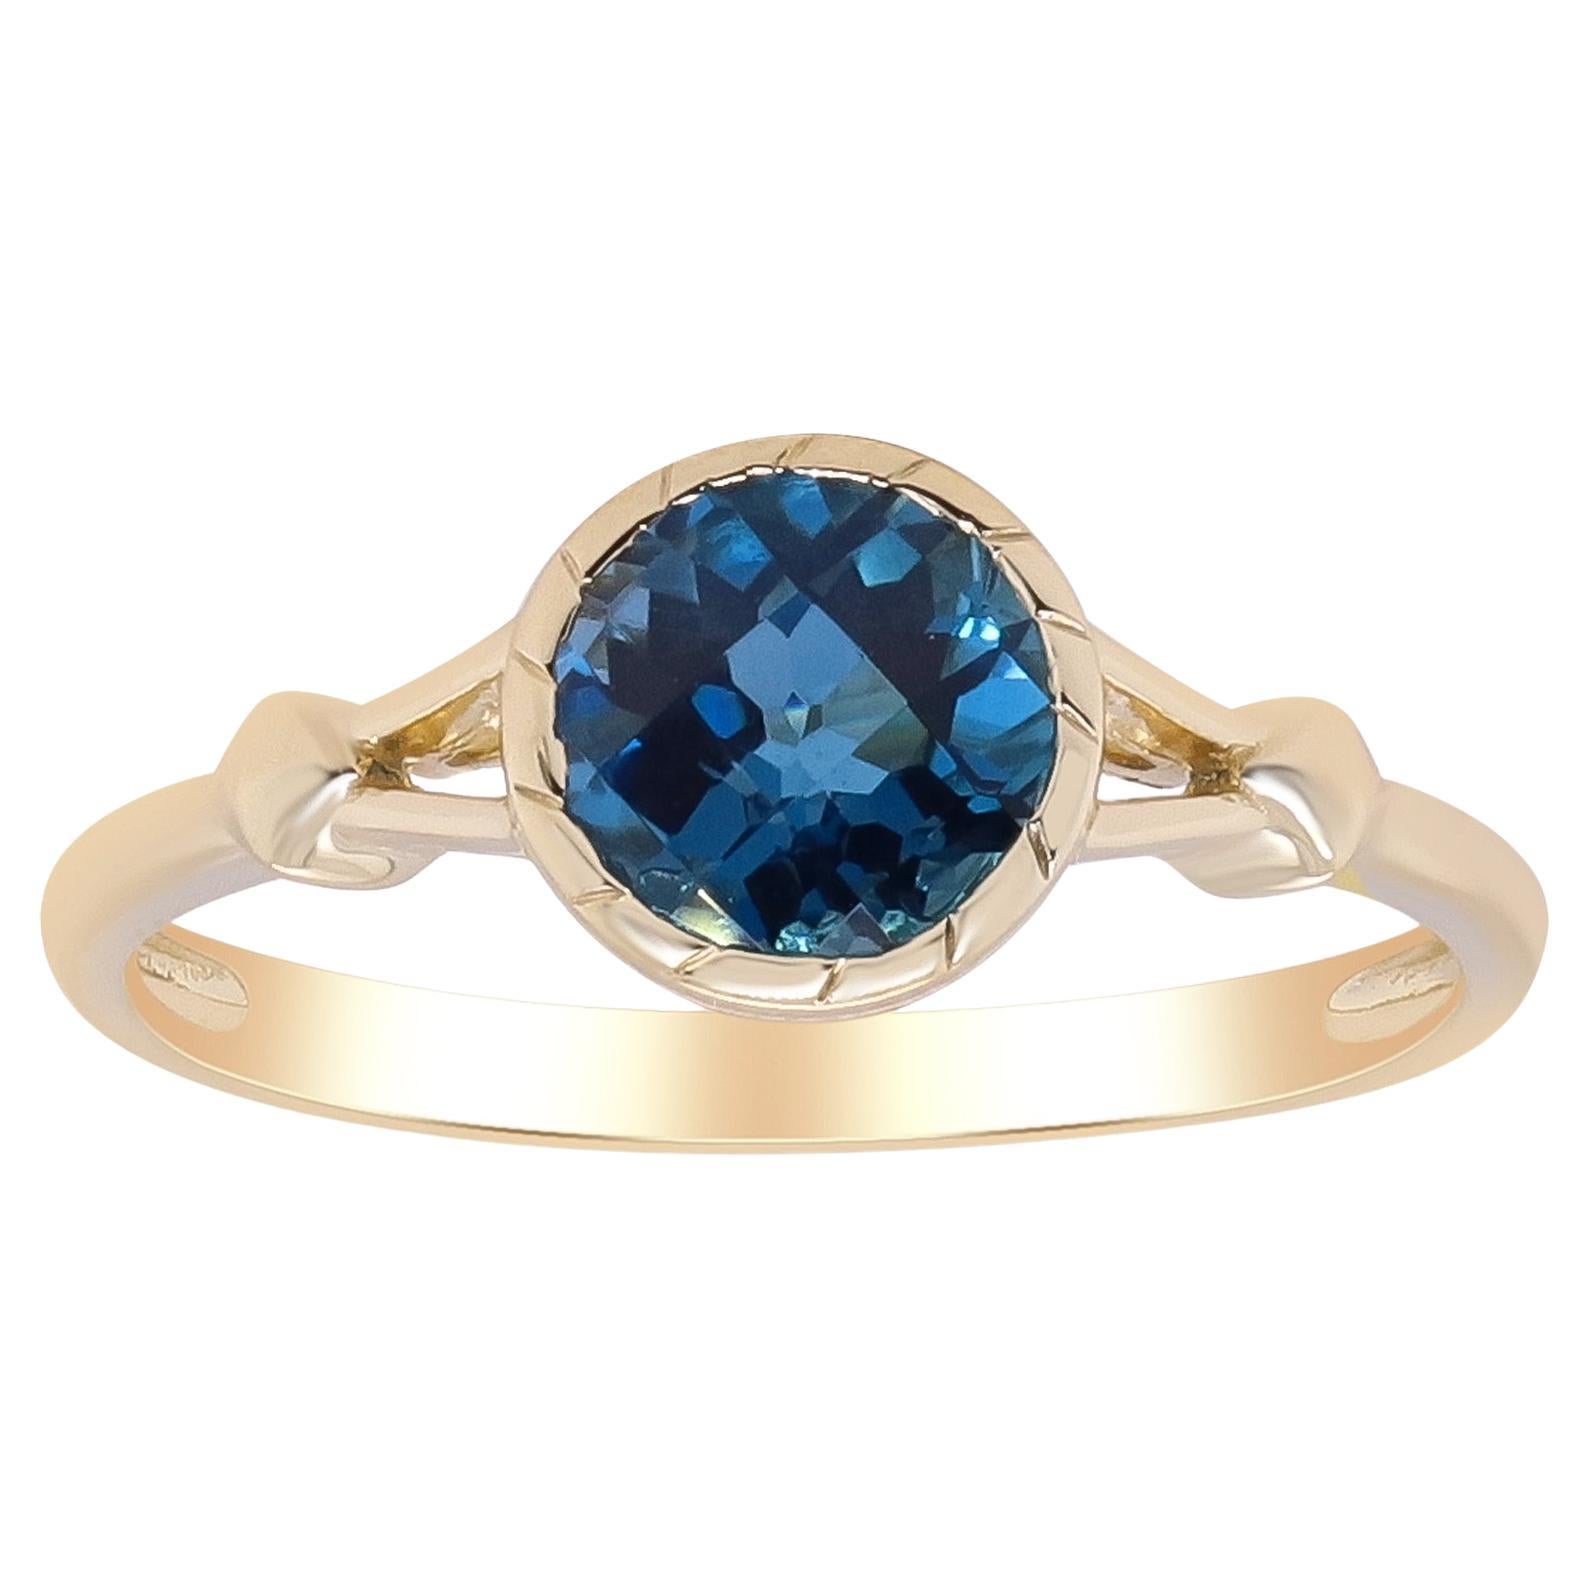 Classic London Blue Topaz with Diamond 14k Yellow Gold Ring For Women/Girls